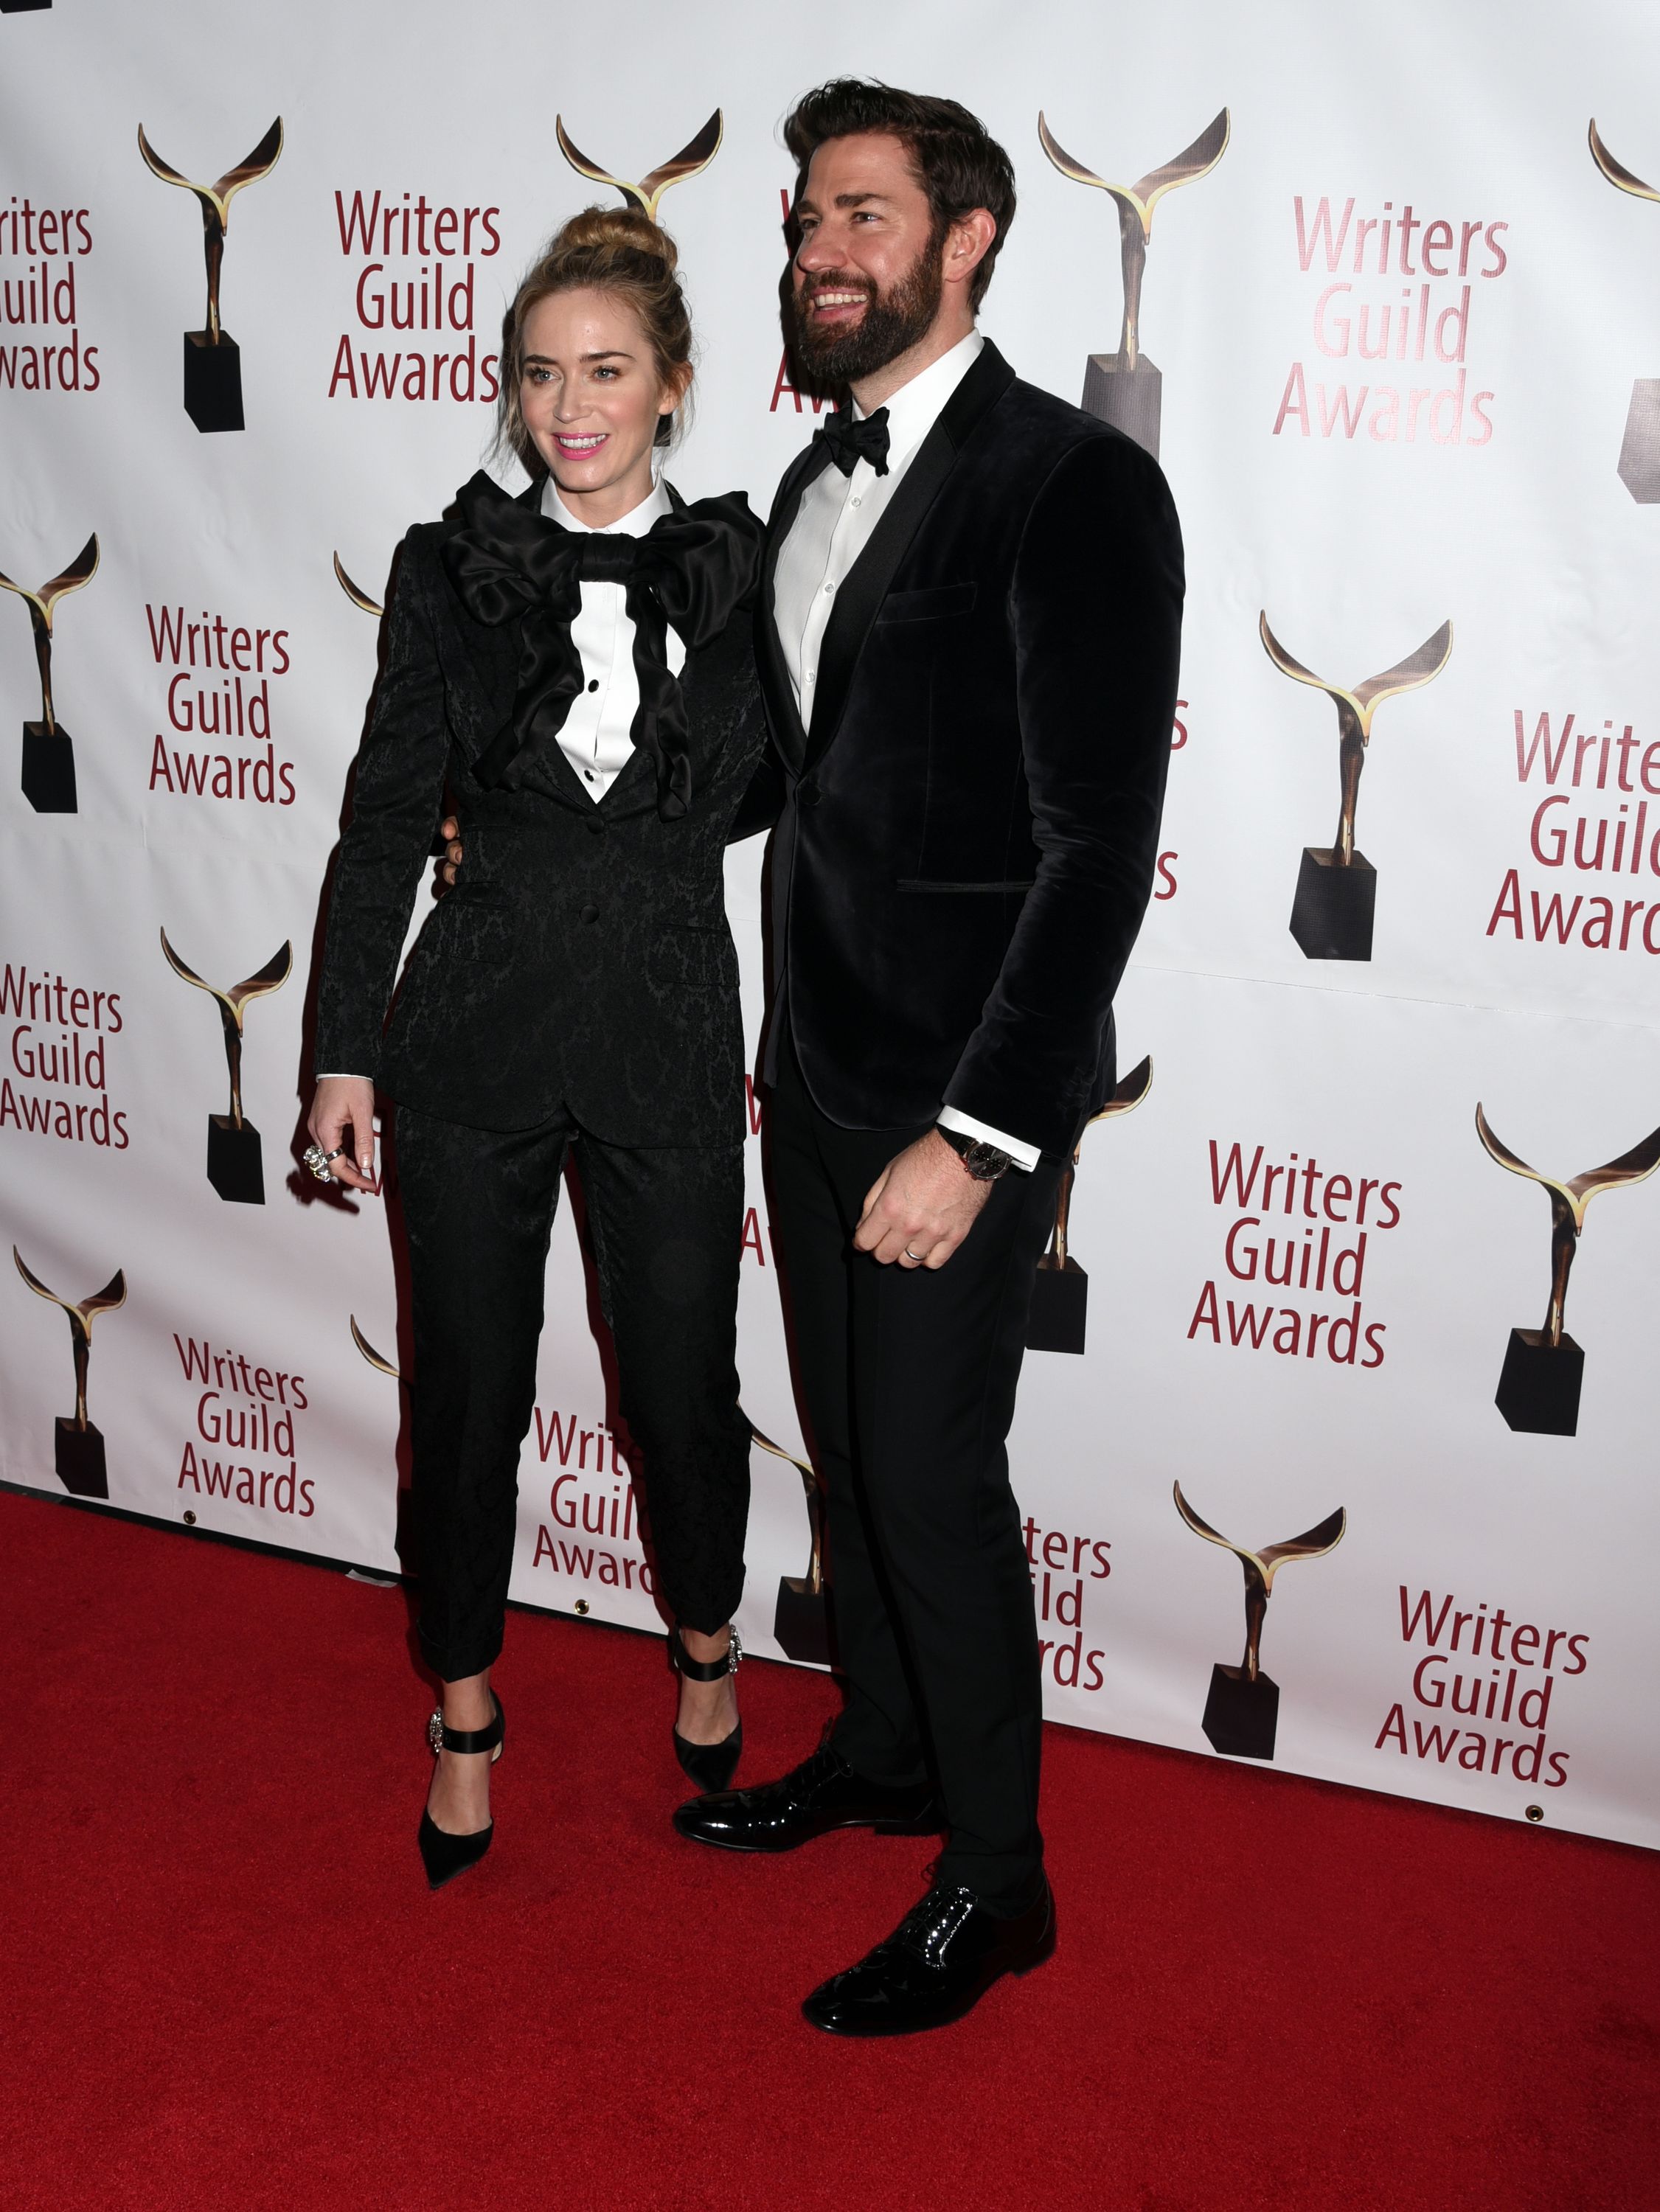 2019-02-17-71st-Annual-Writers-Guild-Awards-127.jpg